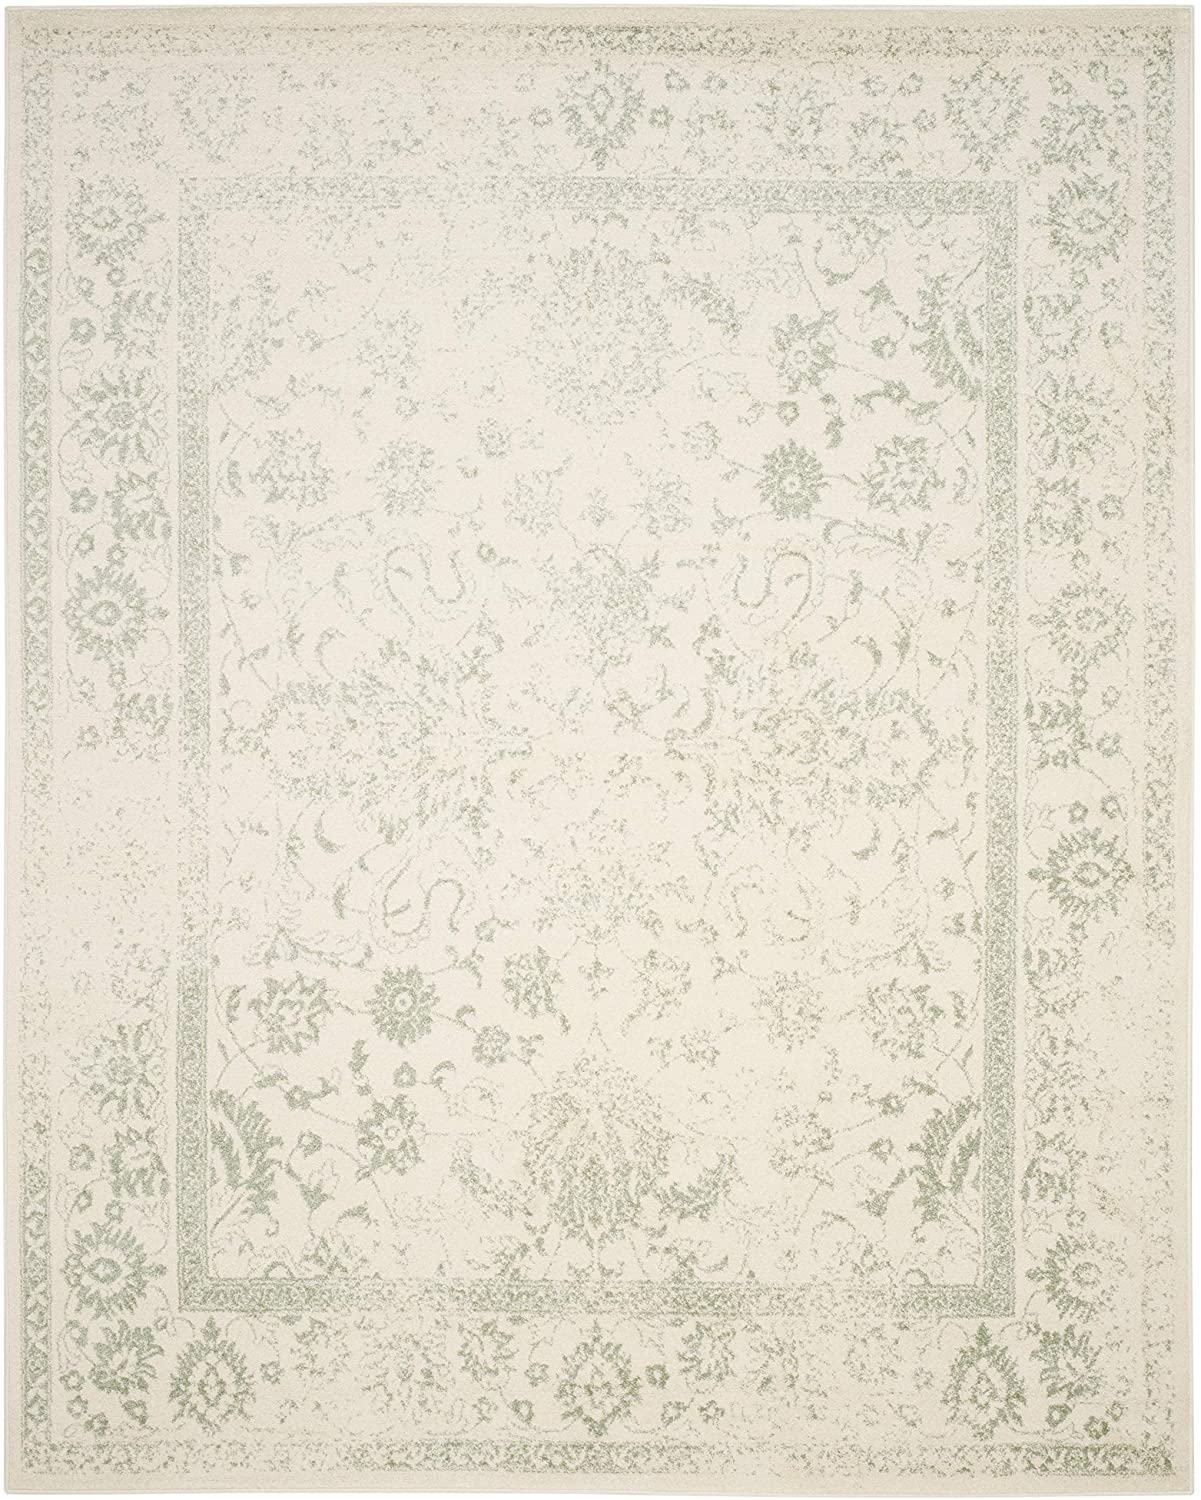 Safavieh Adirondack Collection ADR109C Oriental Distressed Non-Shedding Stain Resistant Living Room Bedroom Runner, 2'1" x 6' , Ivory / Silver